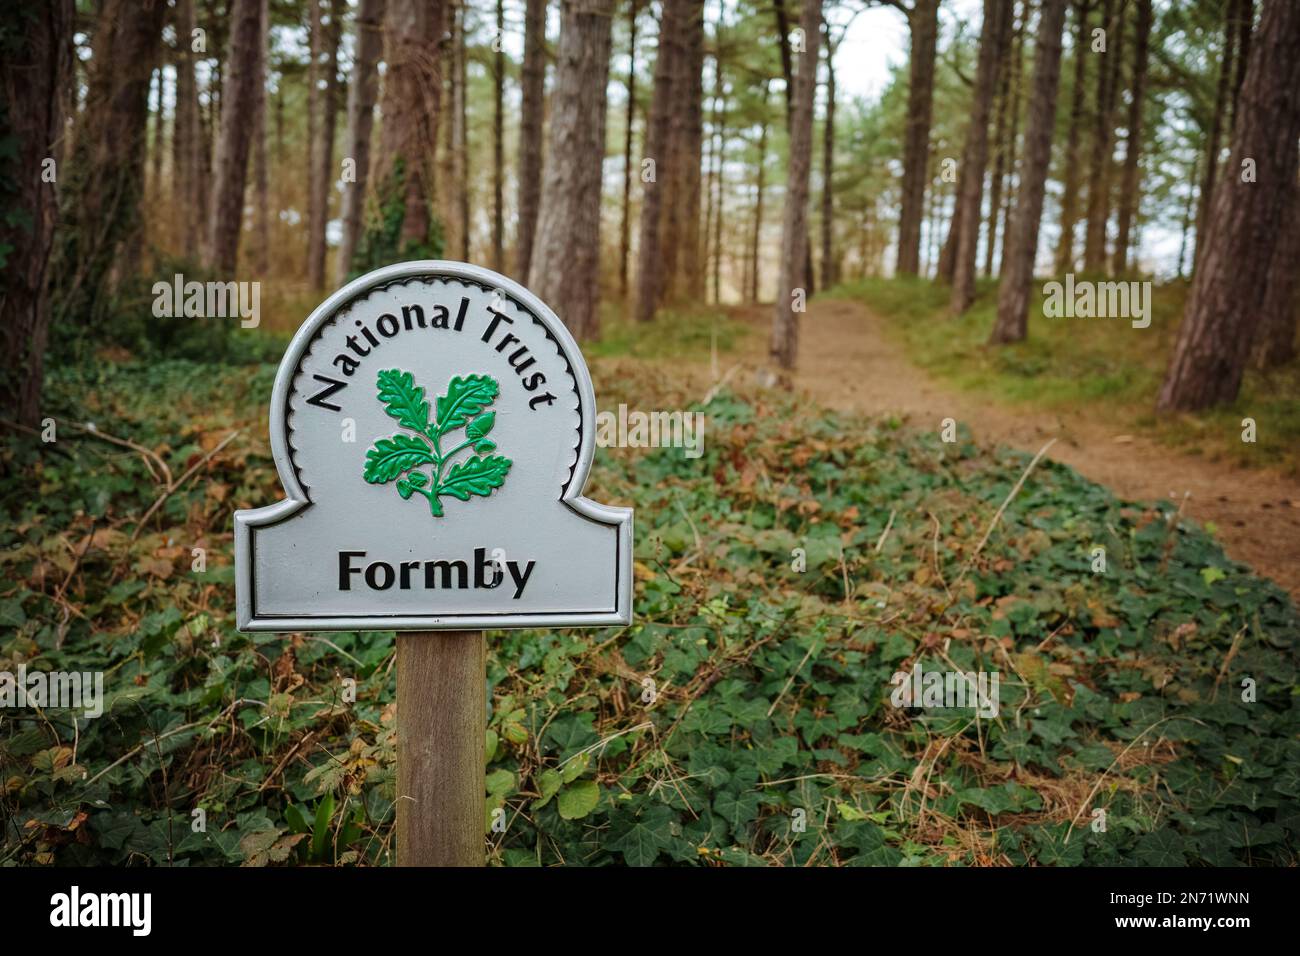 Formby Point national trust woodland walks through the forest and along the beach Stock Photo